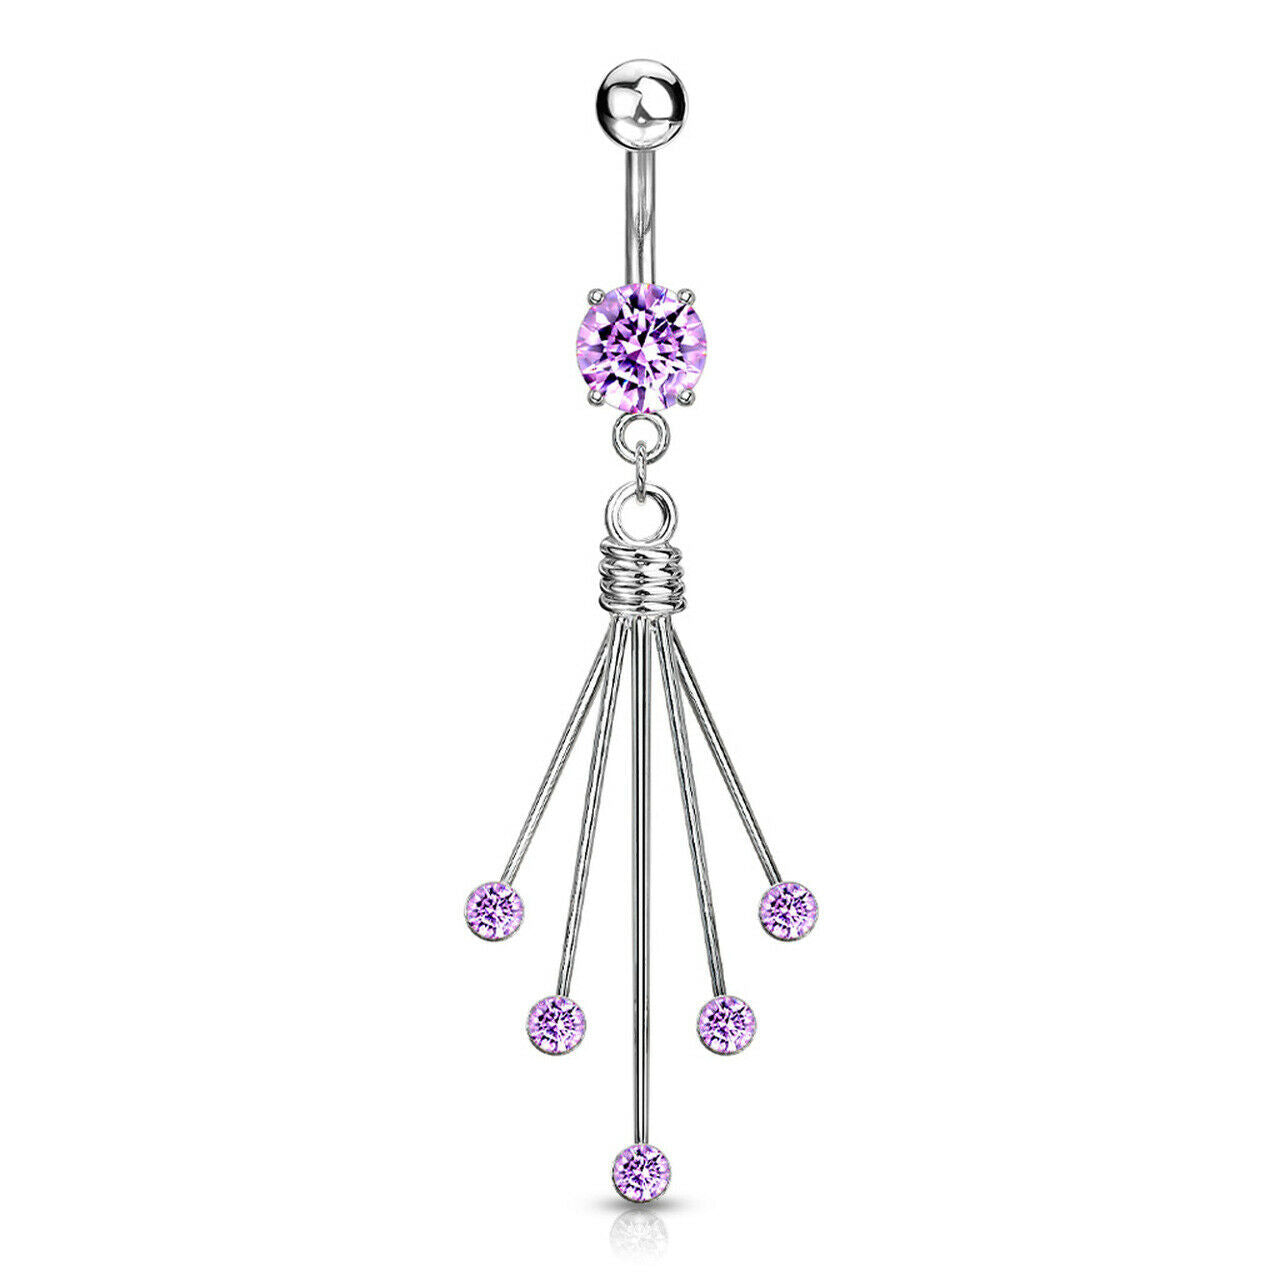 Navel Belly Ring Titanium Shaft with Round dangle CZ 14 Gauge